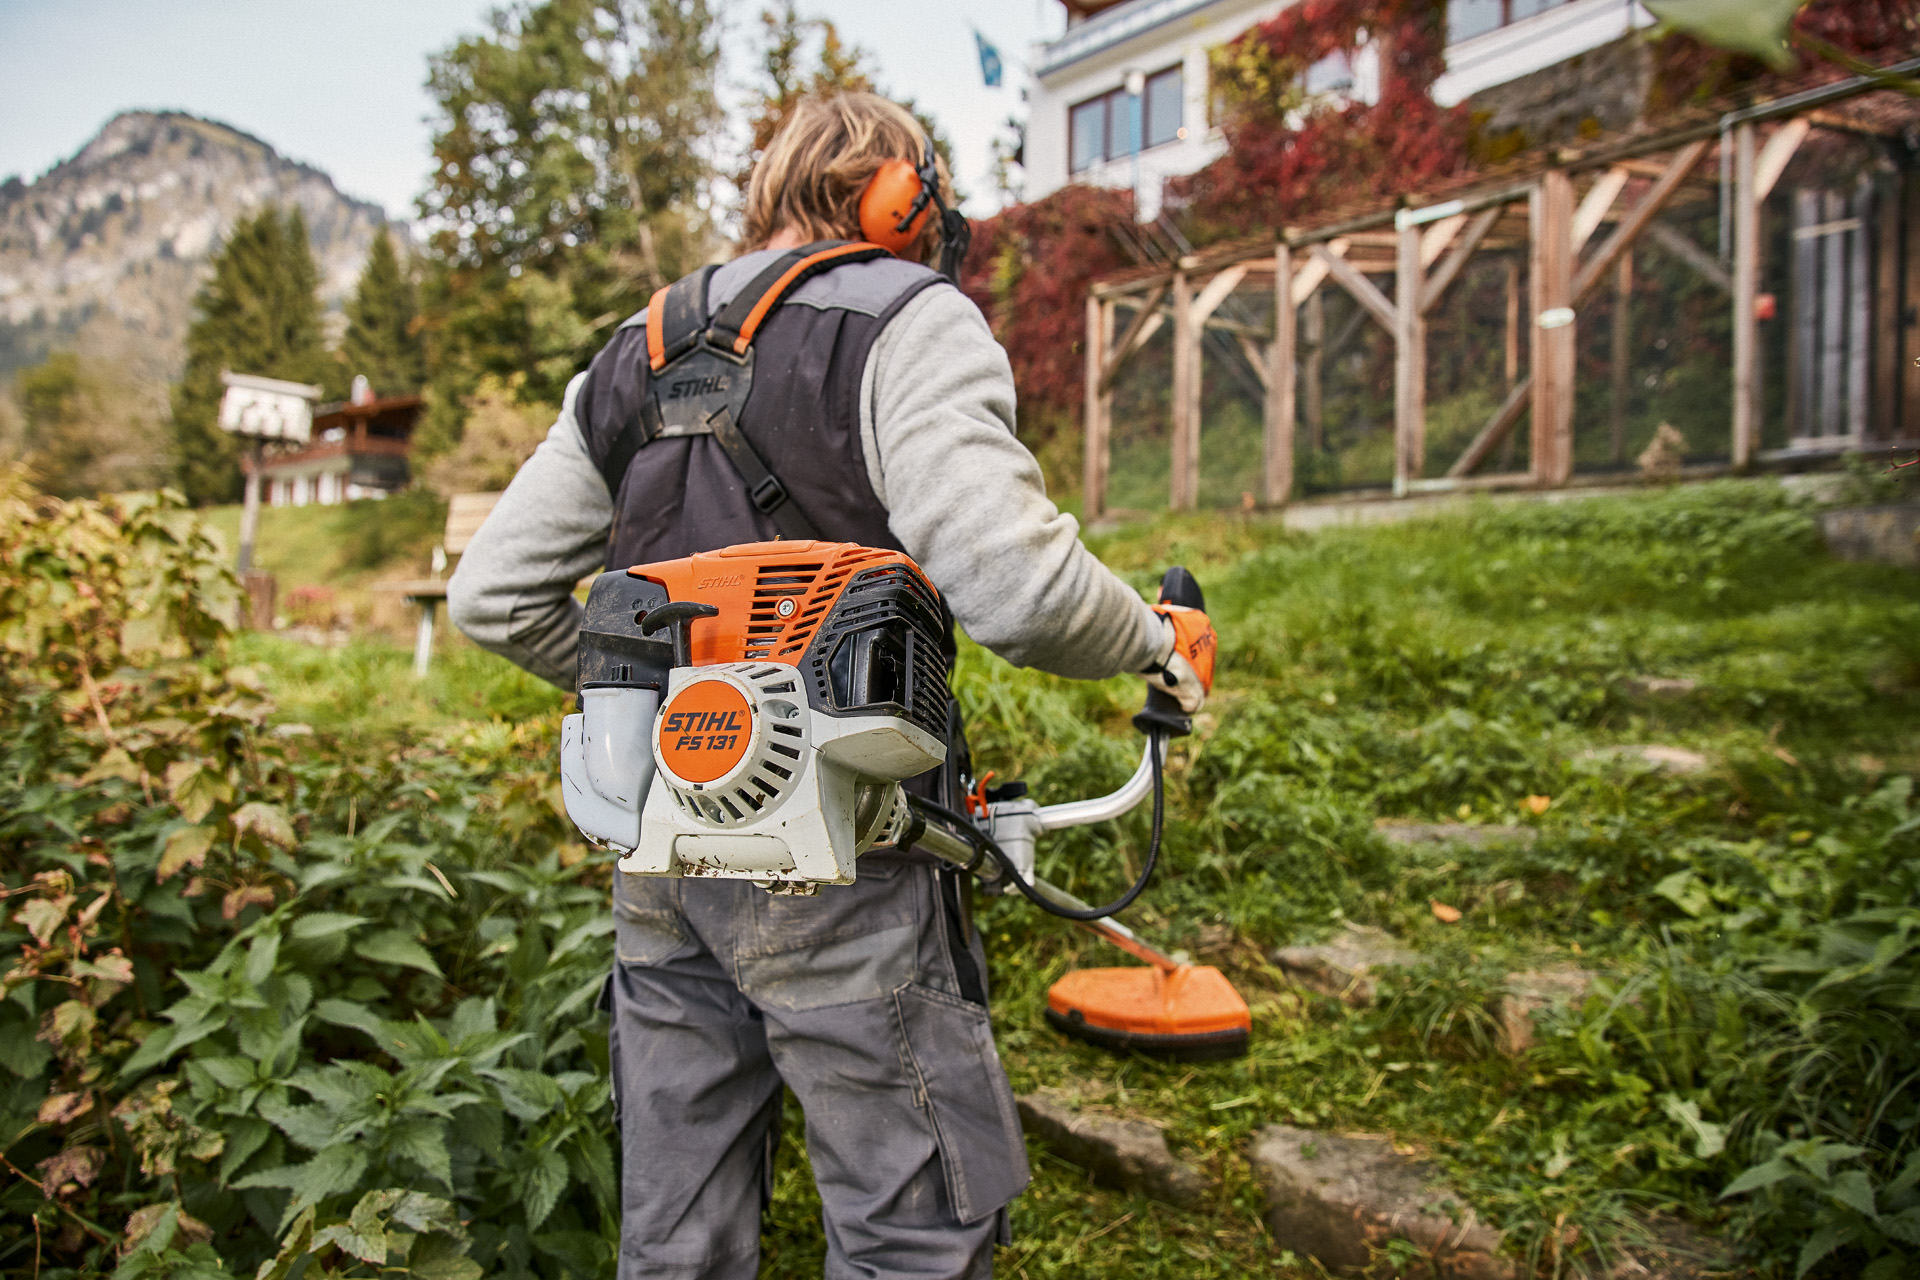 A person wearing protective gear using a STIHL FS 131 petrol brush cutter on uneven grassy ground in front of a house